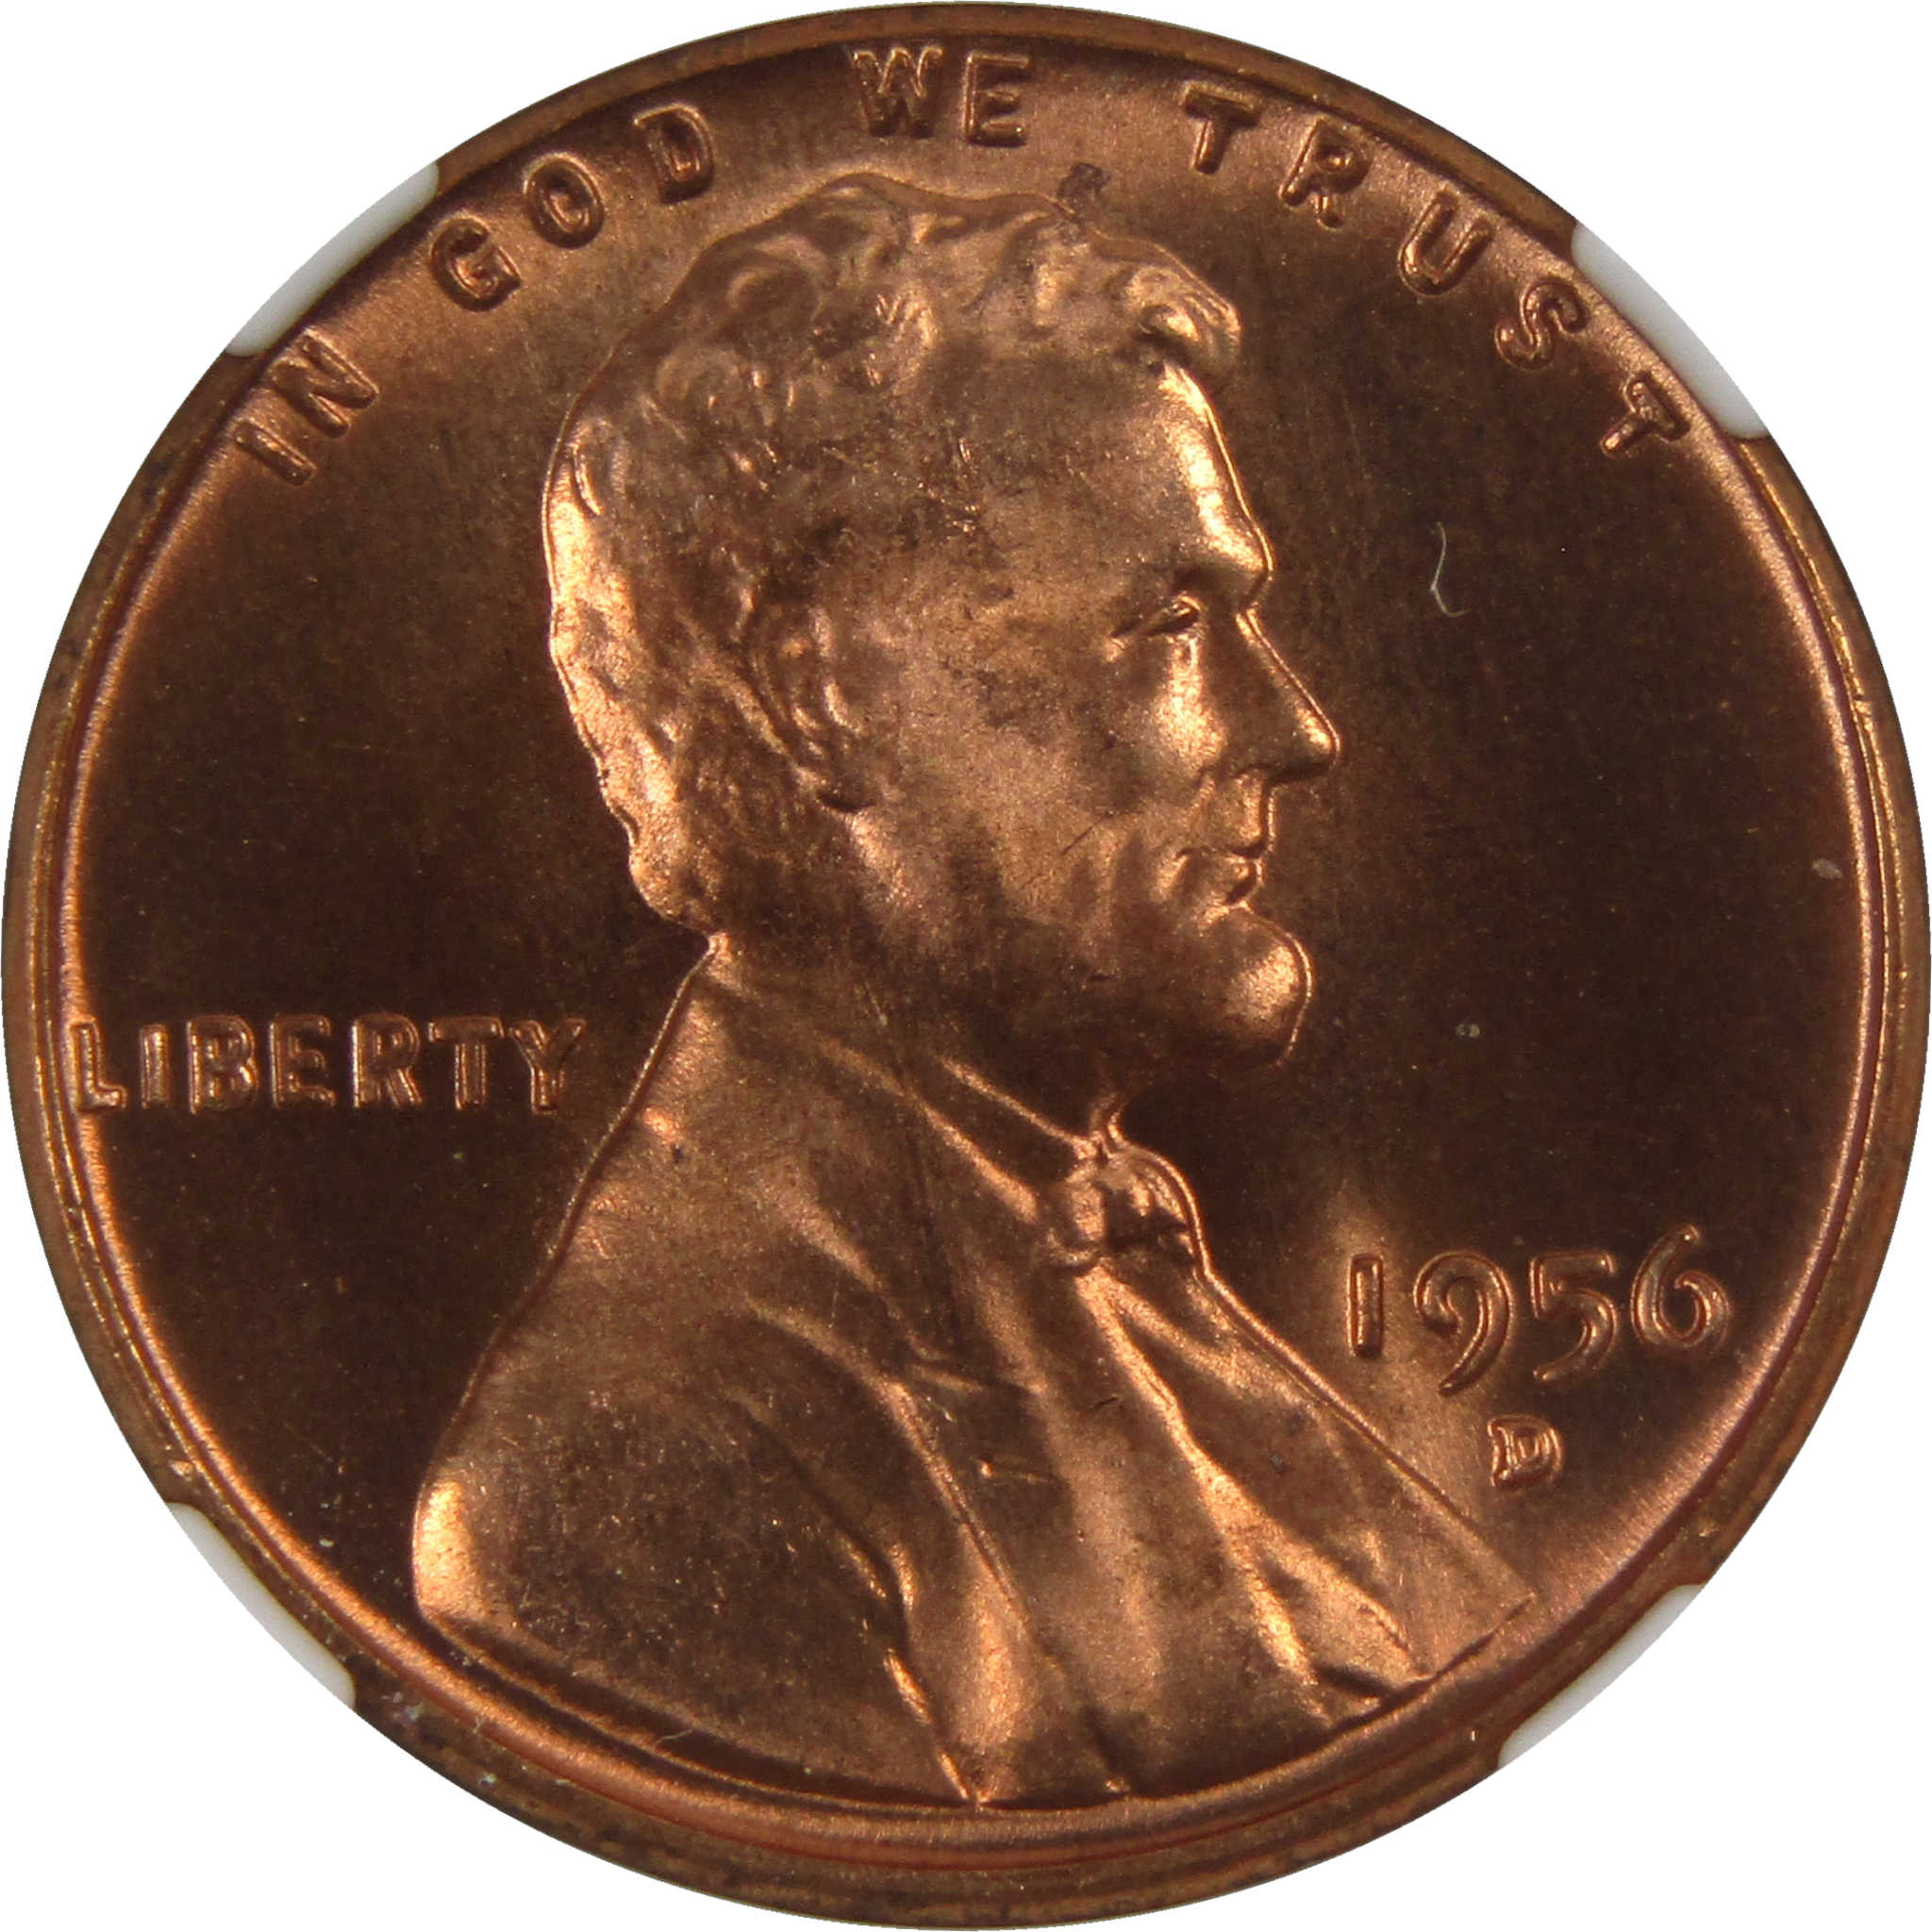 1956 D Lincoln Wheat Cent MS 66 RD NGC Penny Uncirculated SKU:I3662